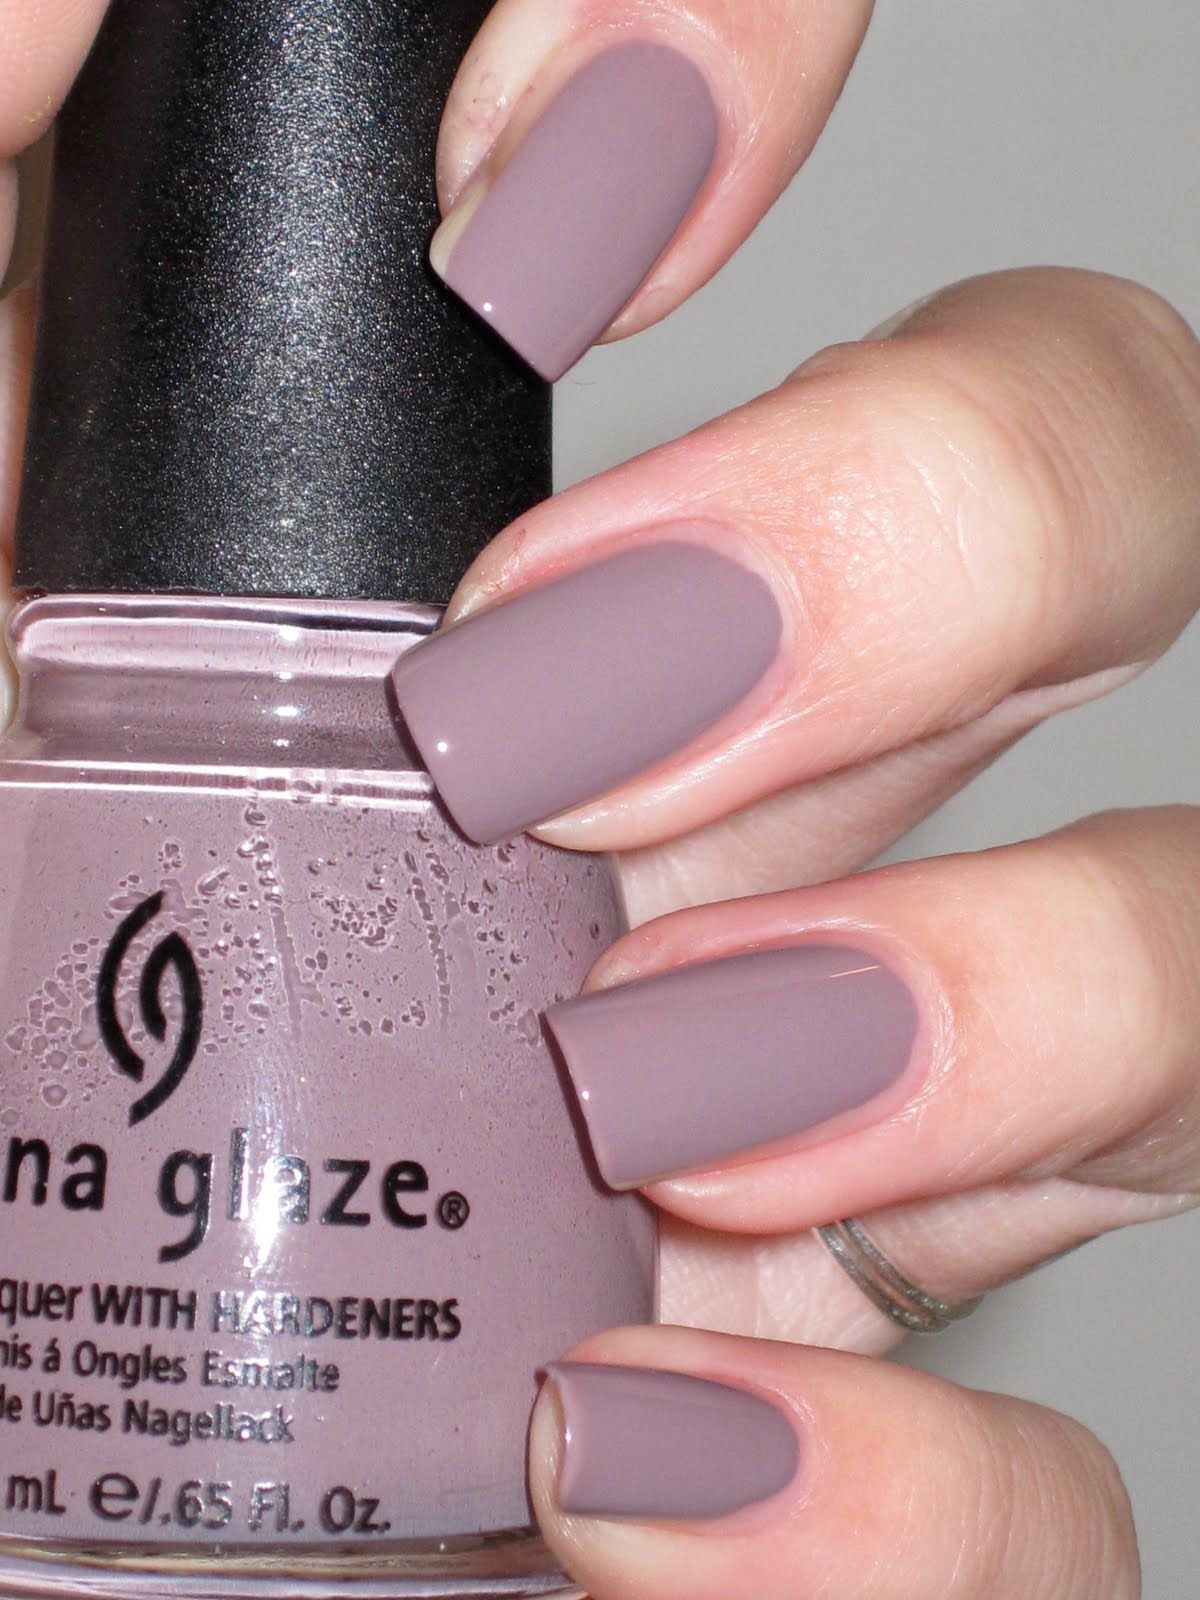 Nice Nail Colors
 China Glaze Channelesque My favorite color just the